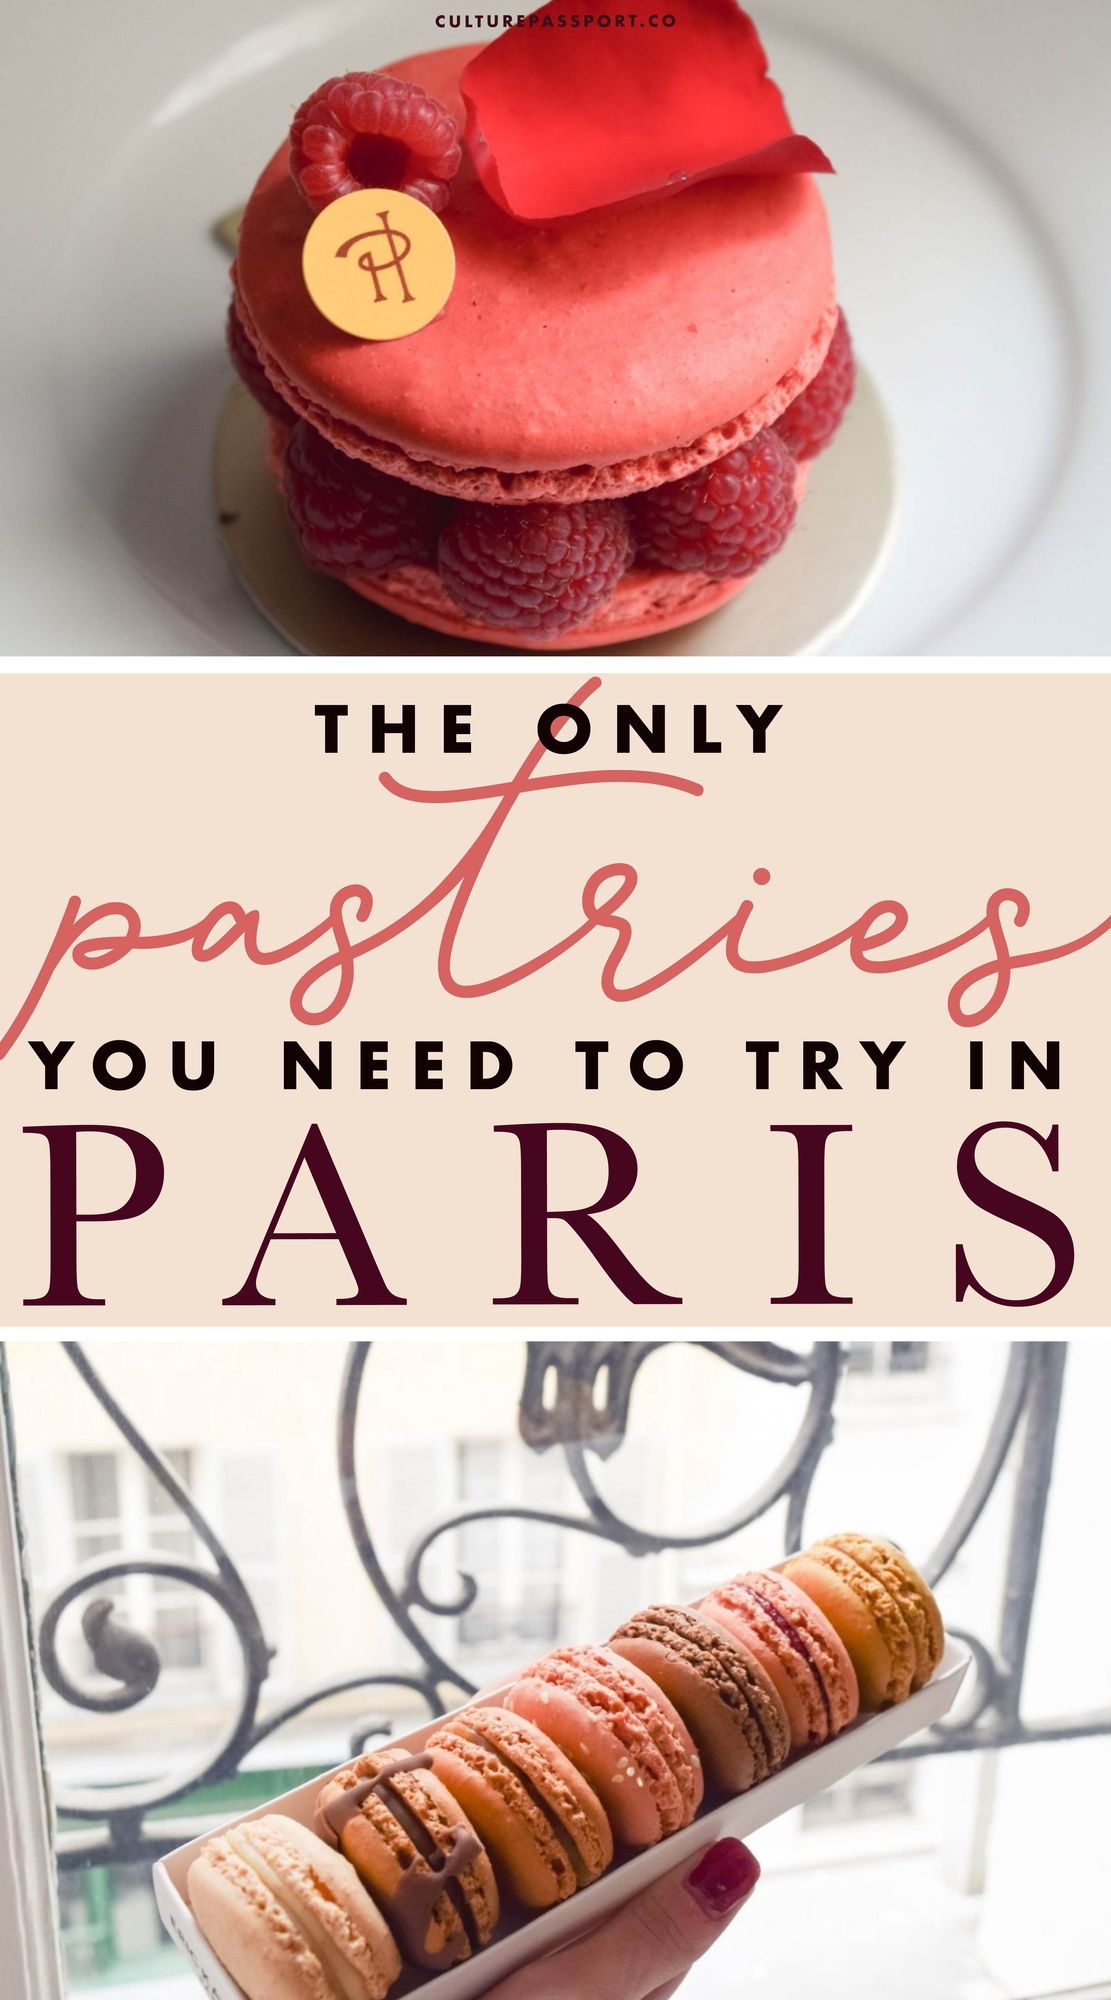 The ONLY Pastries You Need To Try In Paris